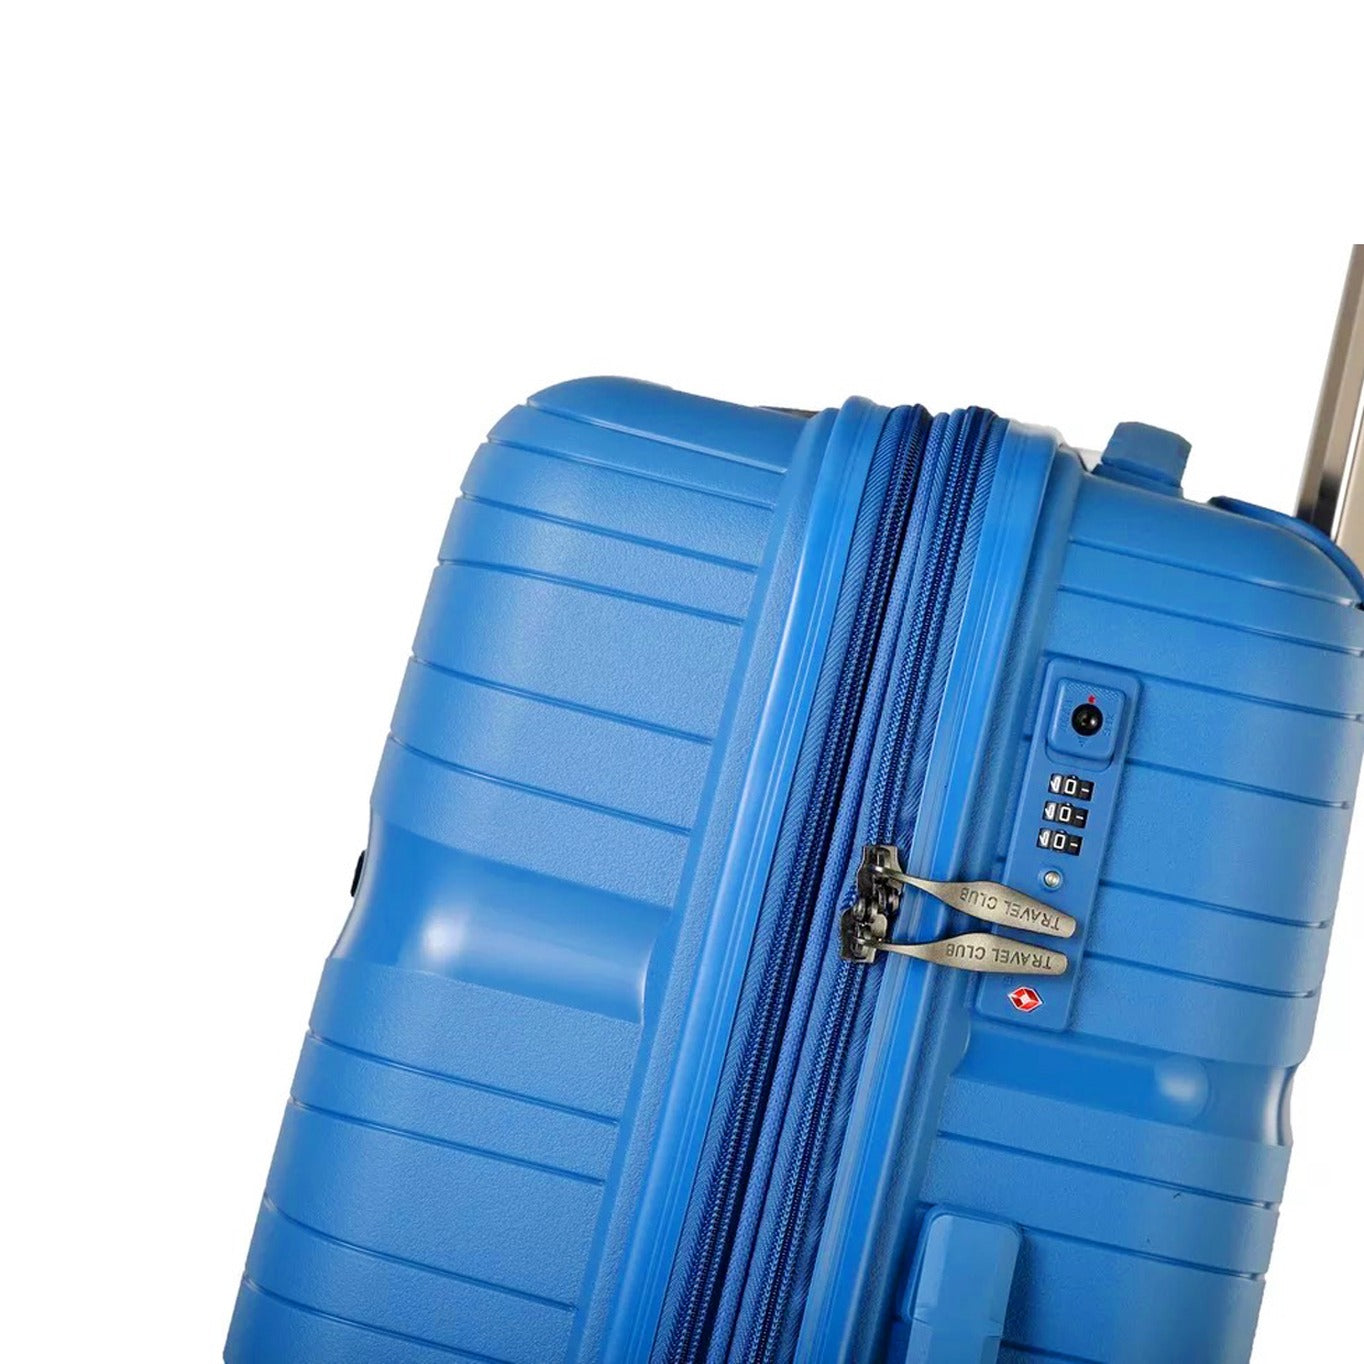 28" Sky Blue Colour Royal PP Luggage Lightweight Hard Case Trolley Bag with Double Spinner Wheel Zaappy.com